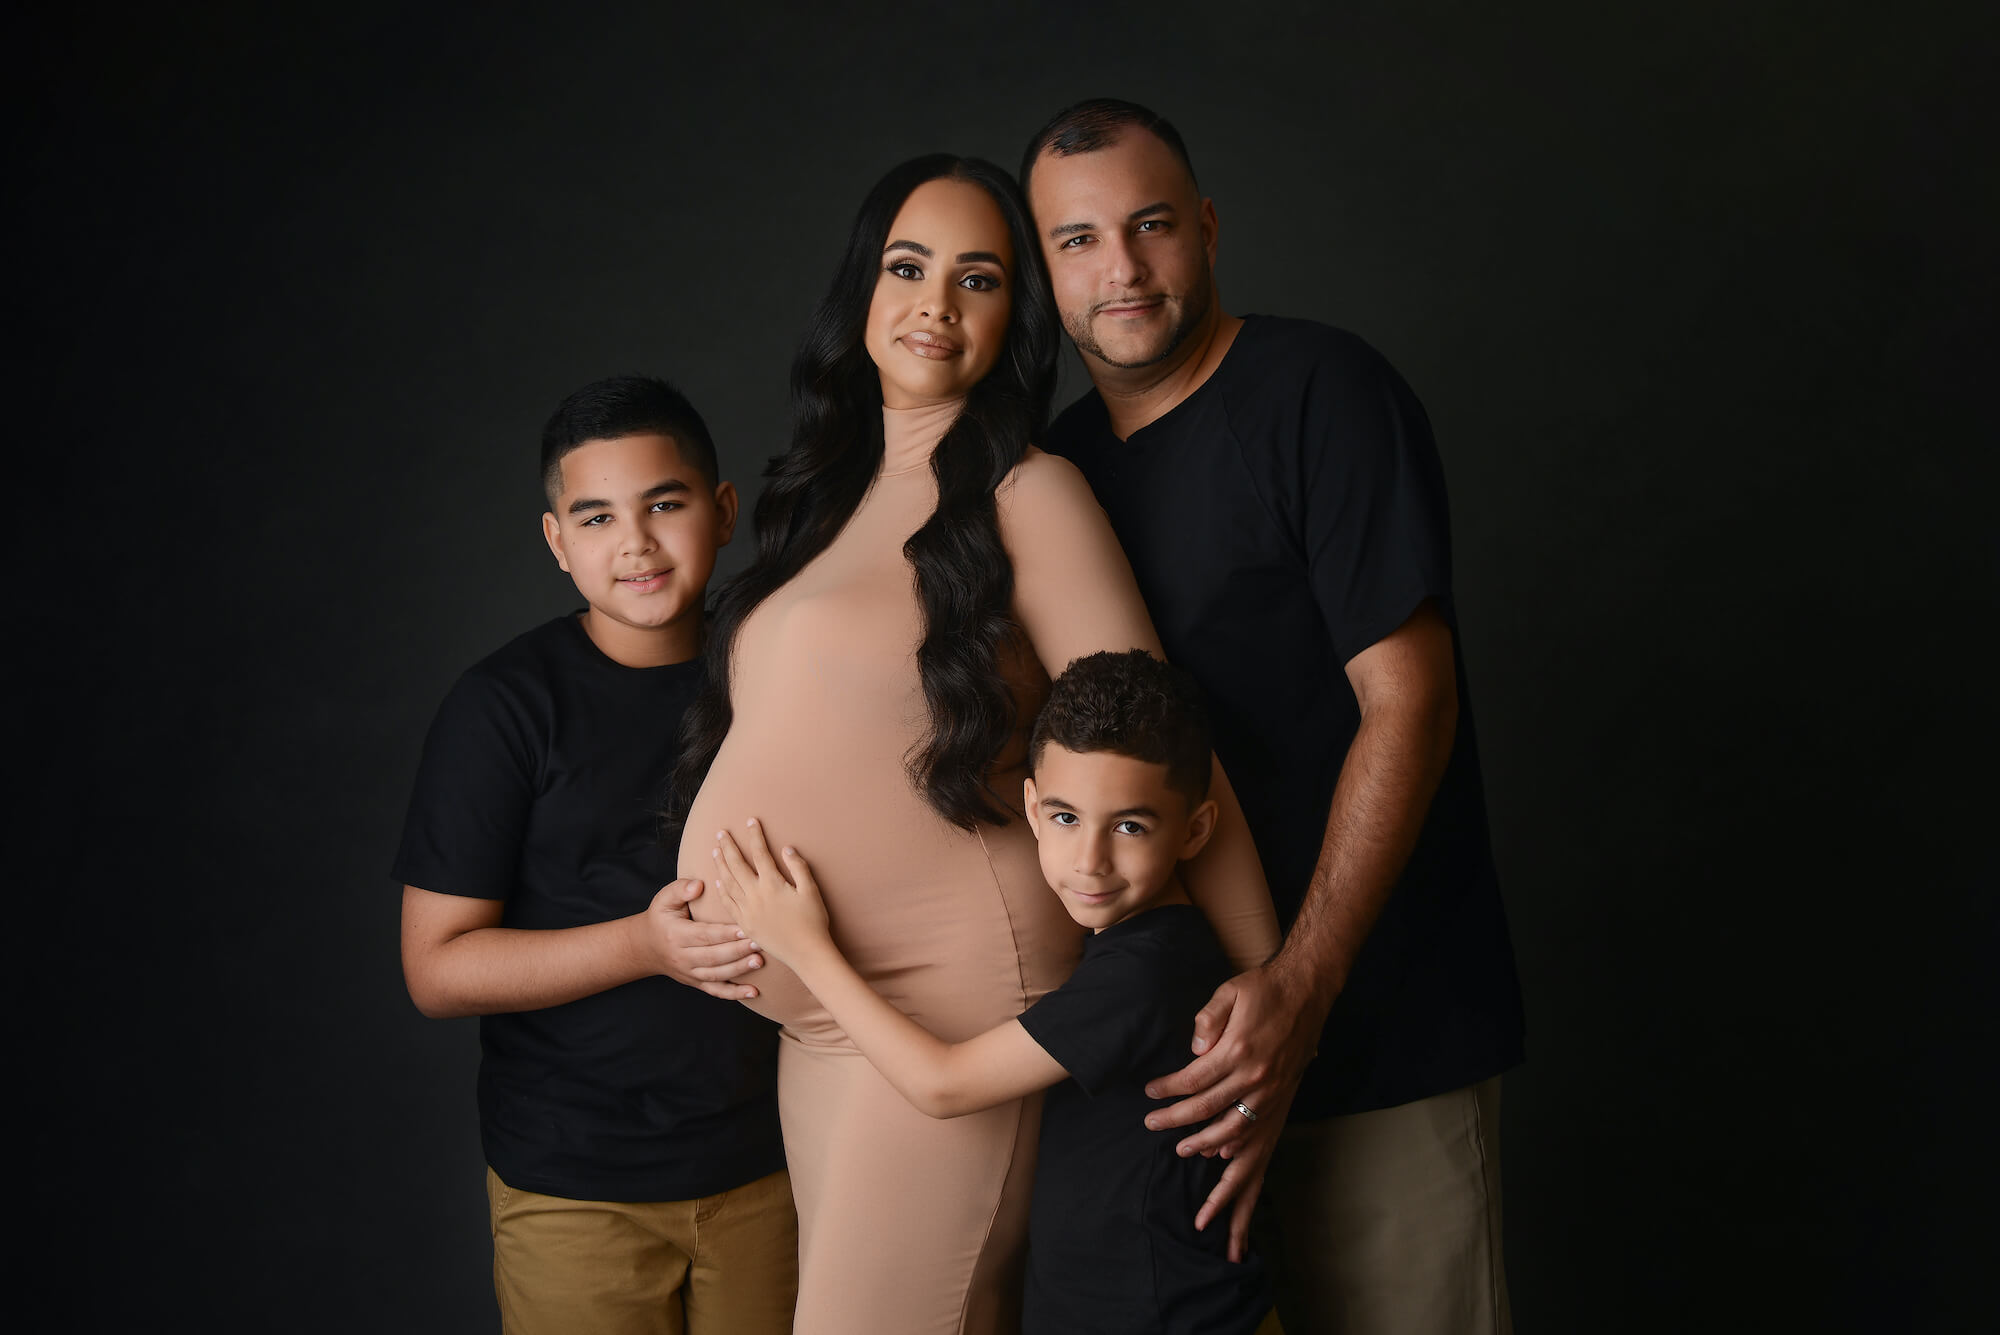 Charming family maternity portrait of the expecting mother, her two sones, and husband. The two sons embrace their mother holding a hand on her baby bump. 